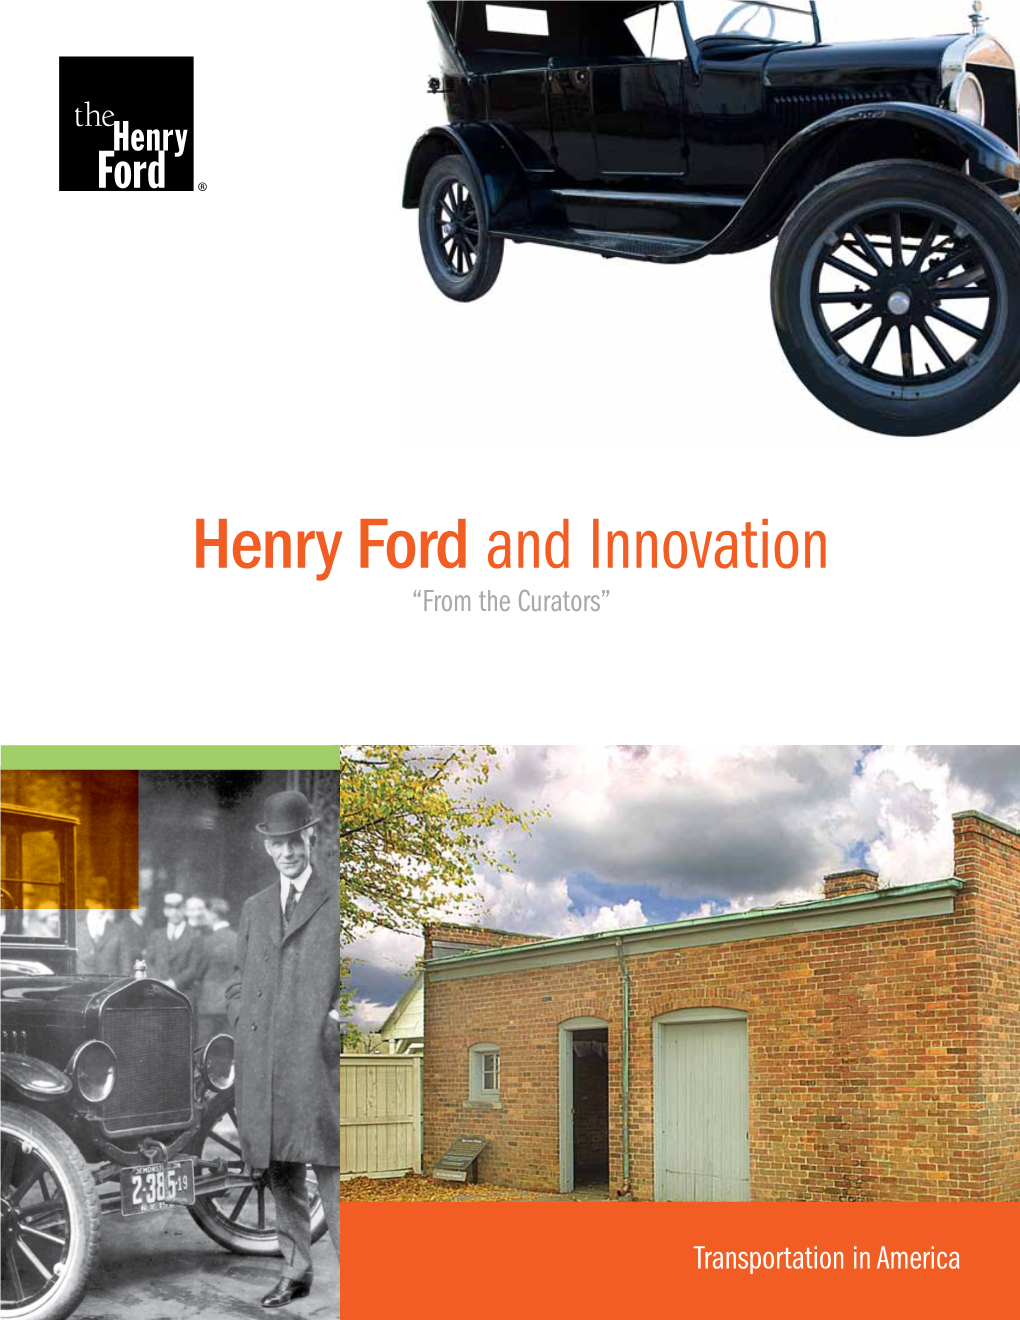 Henry Ford and Innovation “From the Curators”